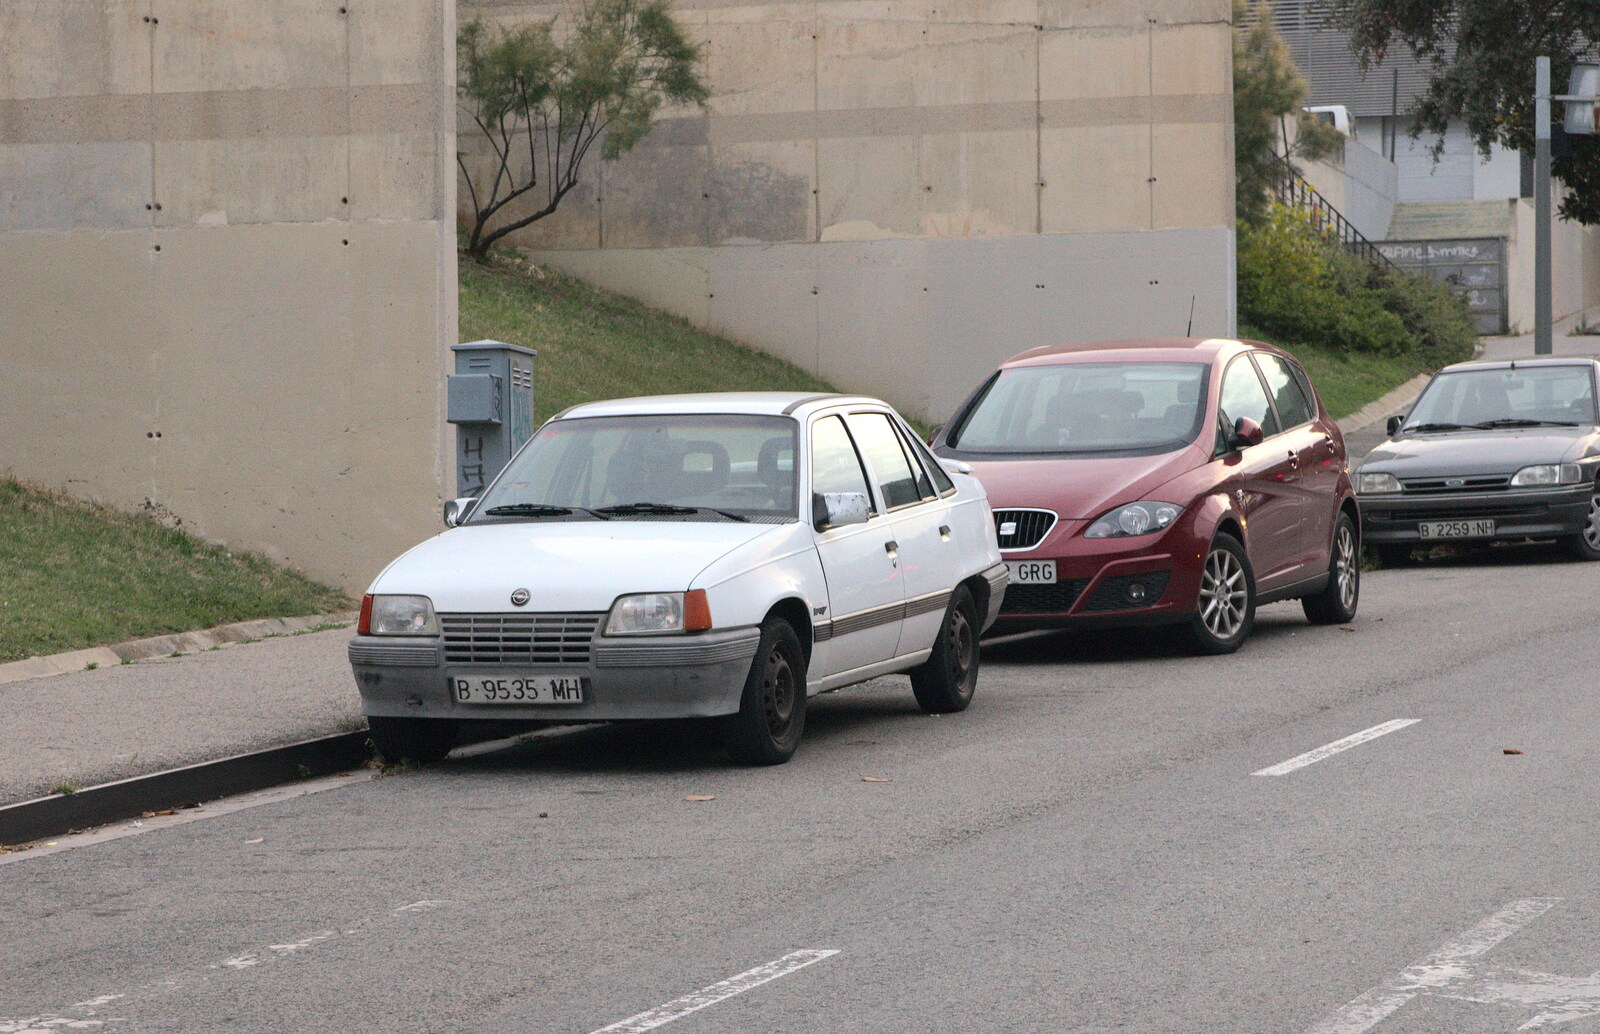 An old Mark 2 Astra (Belmont) from The Open Education Challenge, Barcelona, Catalonia - 13th July 2014